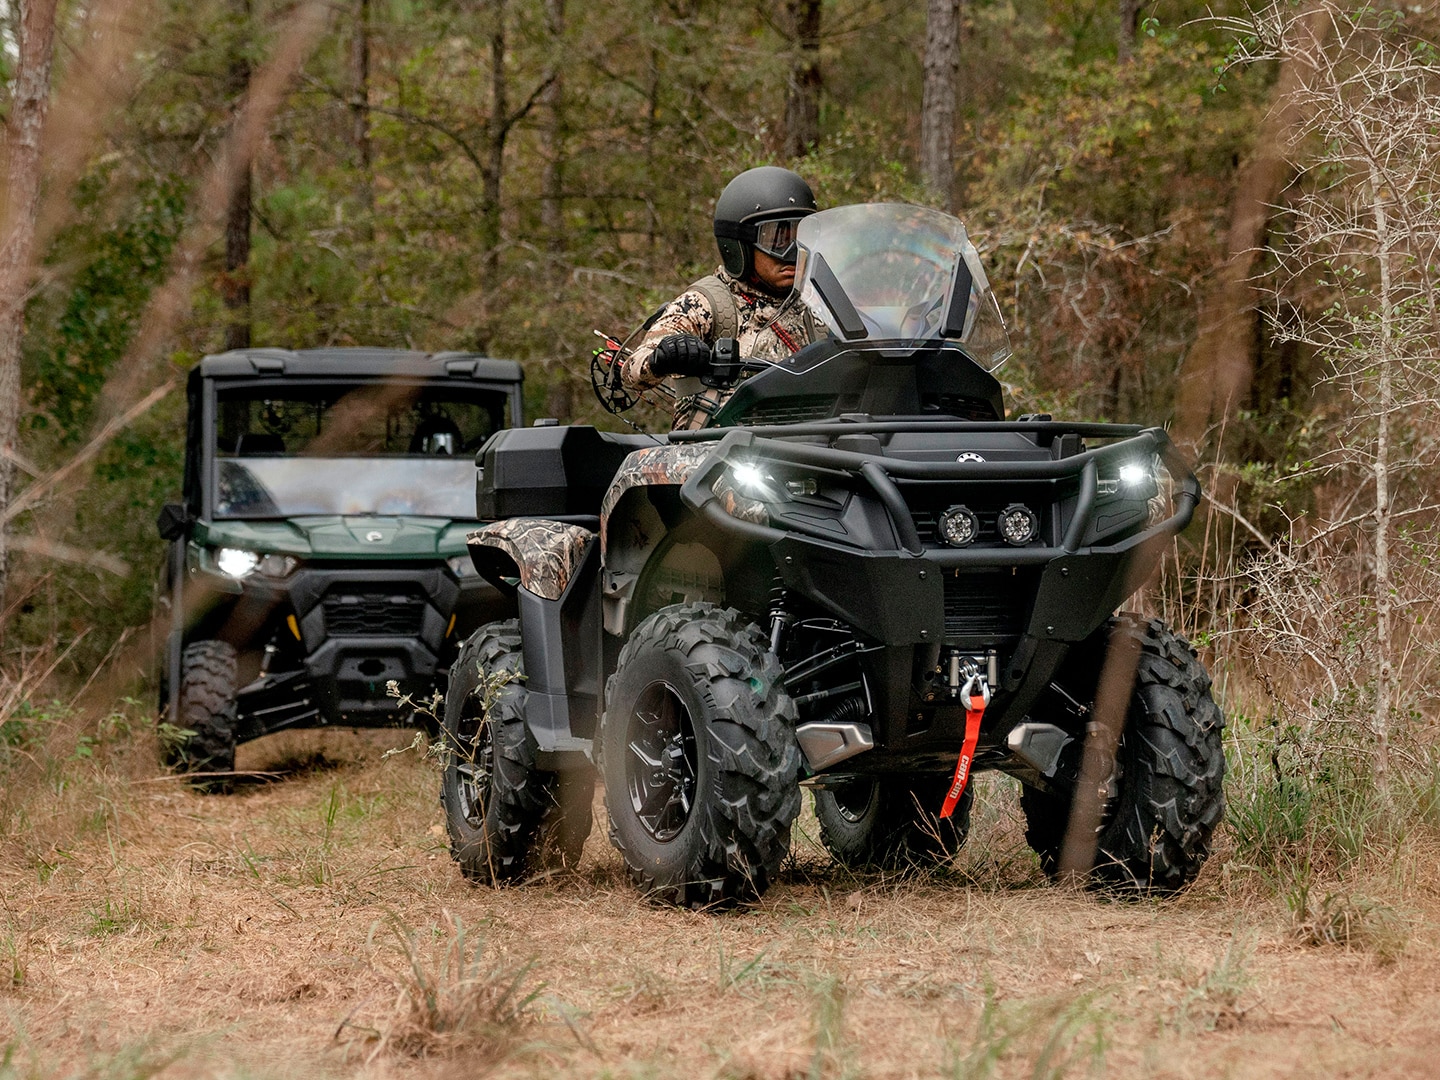 Hunters driving Can-Am rides on a trail